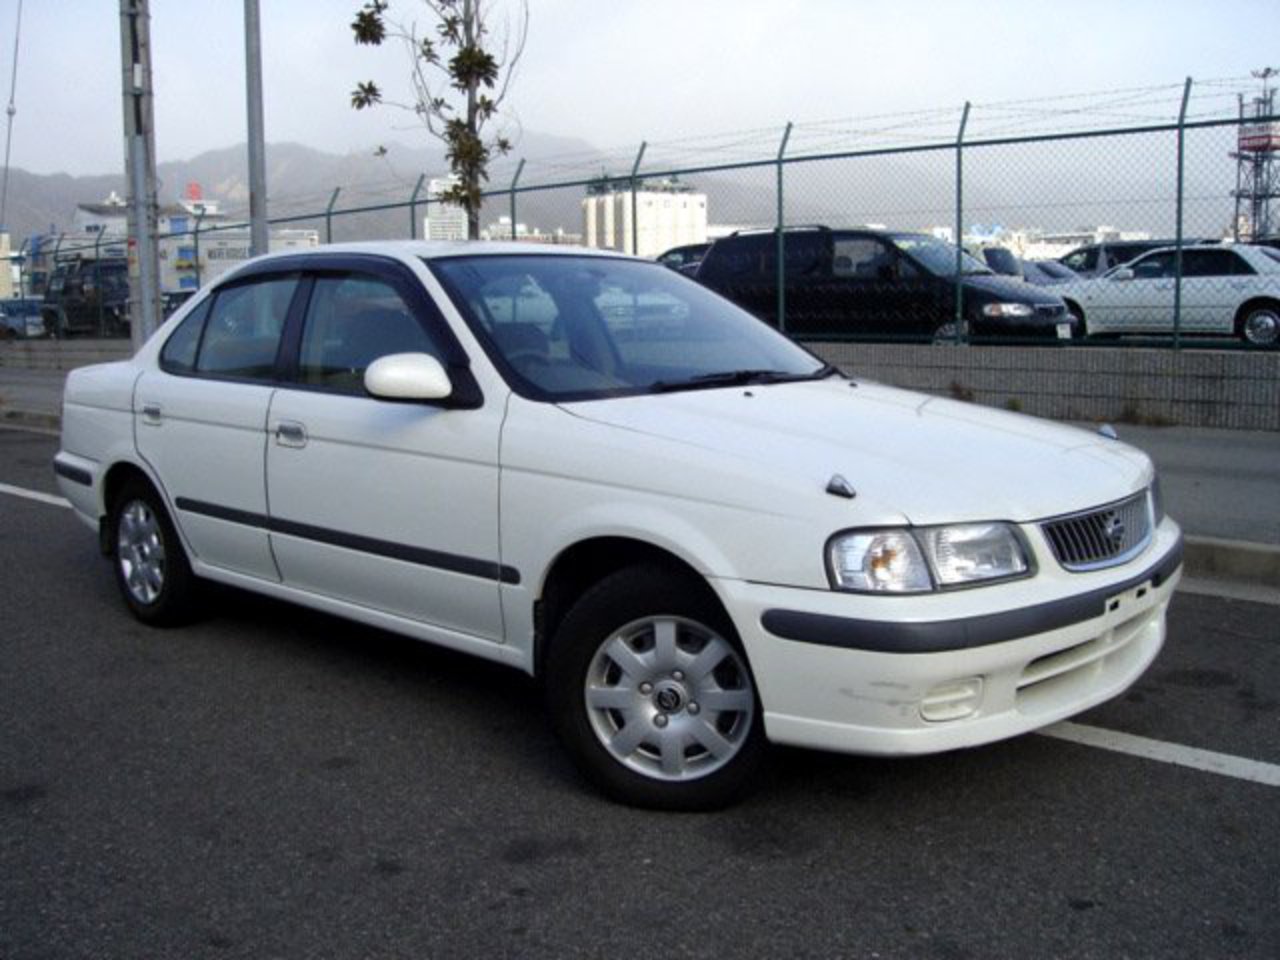 Nissan Sunny Super Saloon Limited â€” a model manufactured by Nissan.